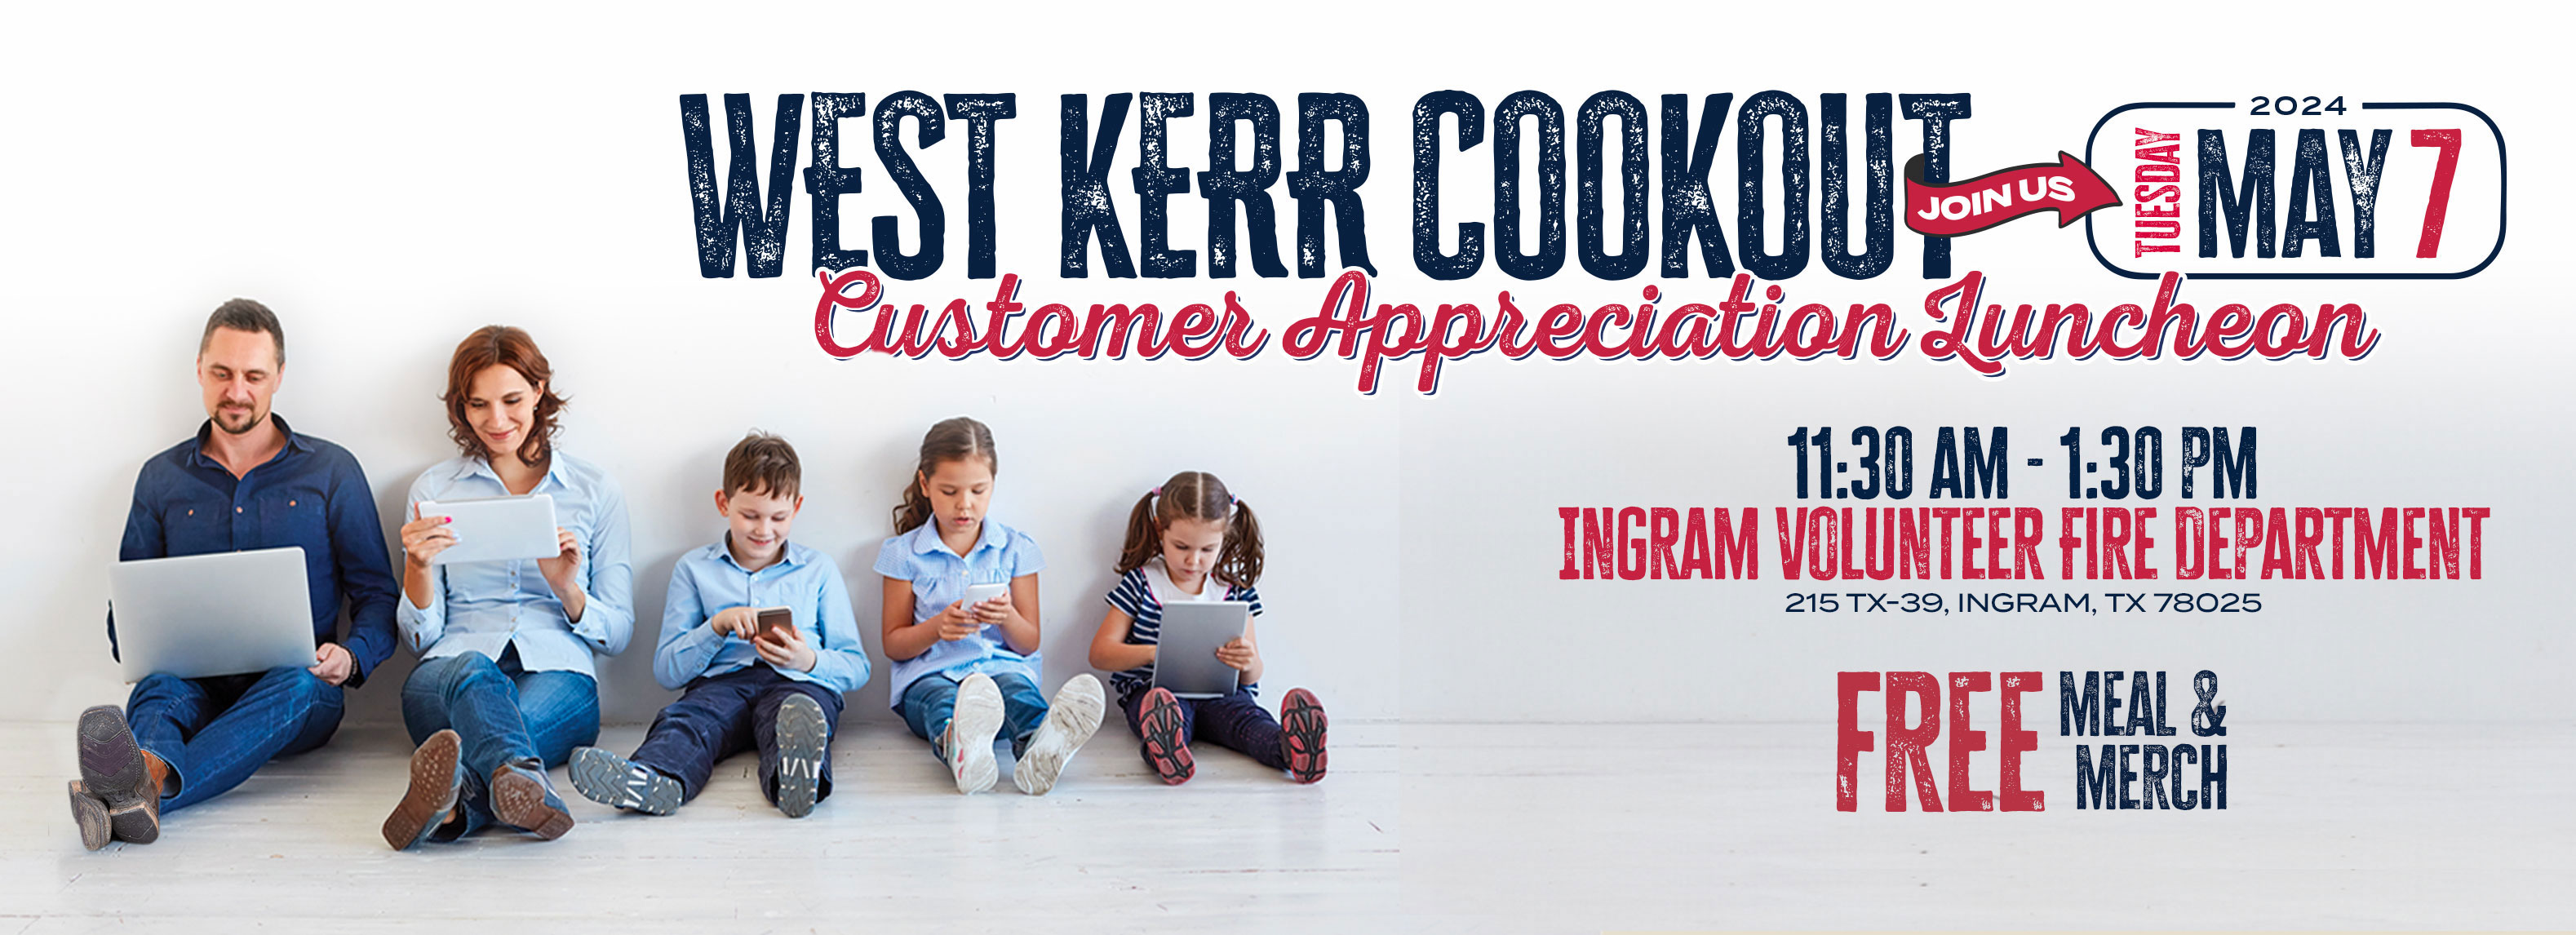 West Kerr Cookout - Tuesday May 7, 2024, Customer Appreciation Luncheon